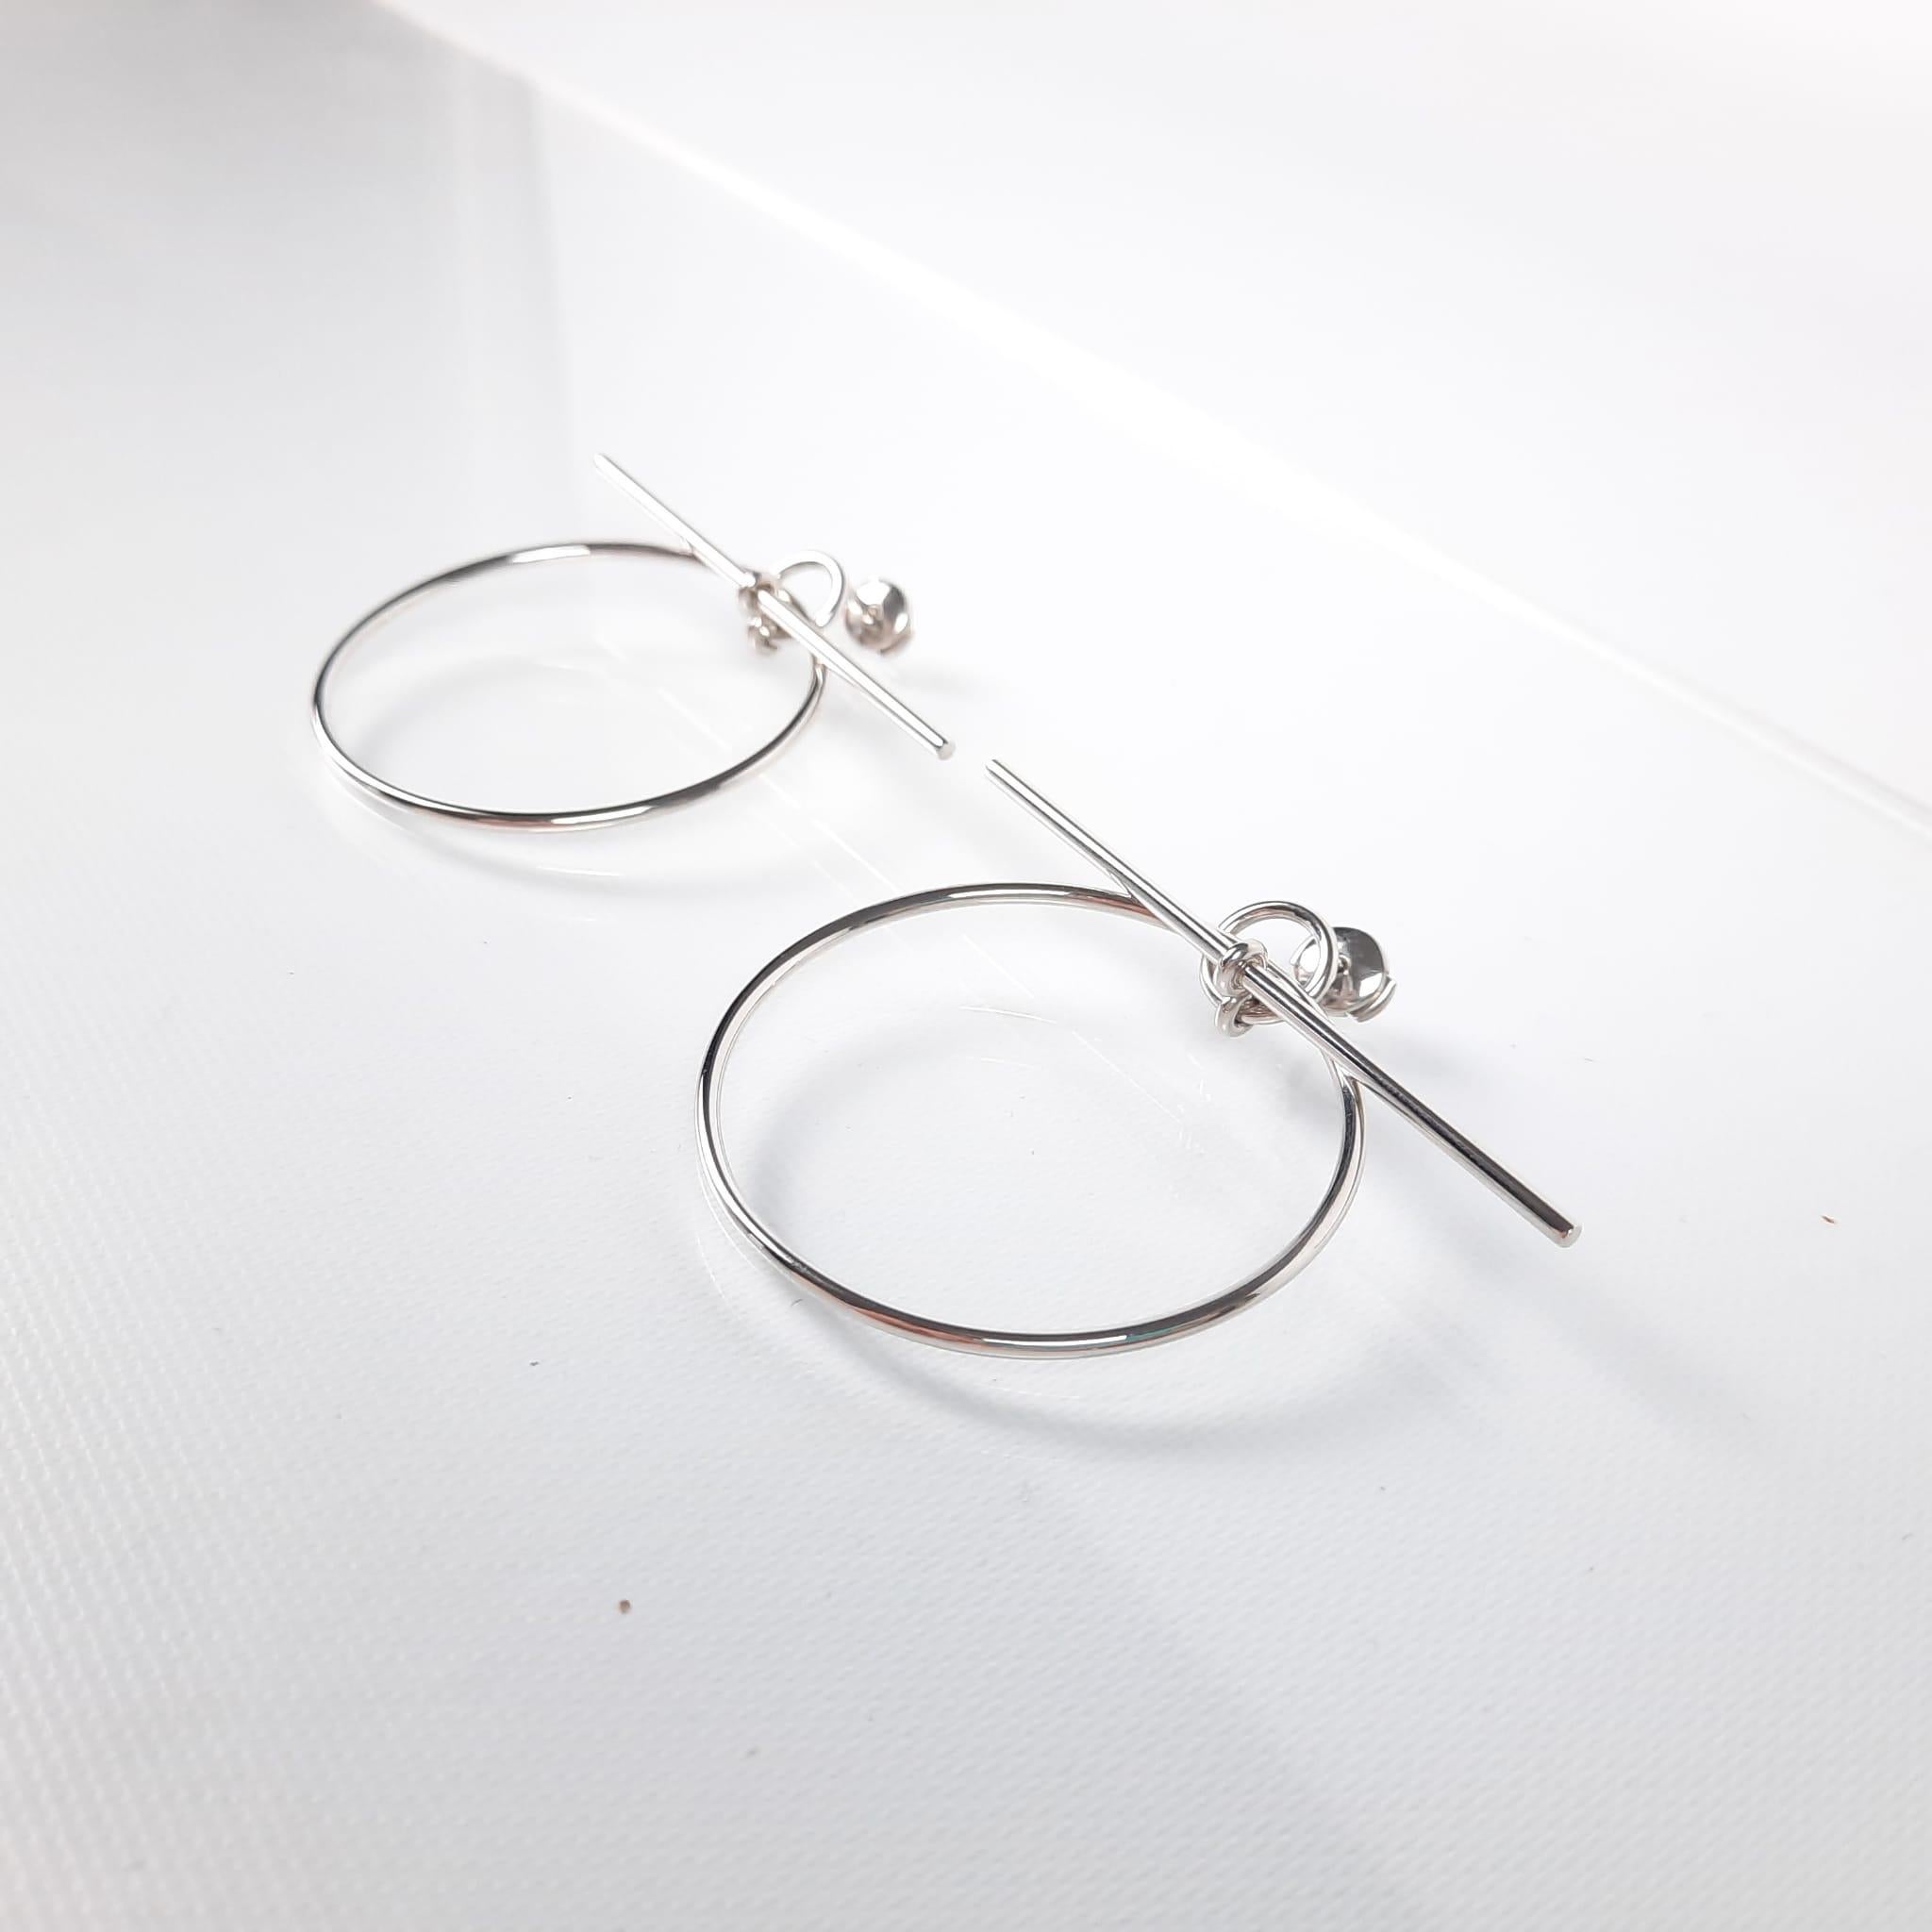 The stick ring, Hermès signature, is transformed into minimalist and graphic earrings.

